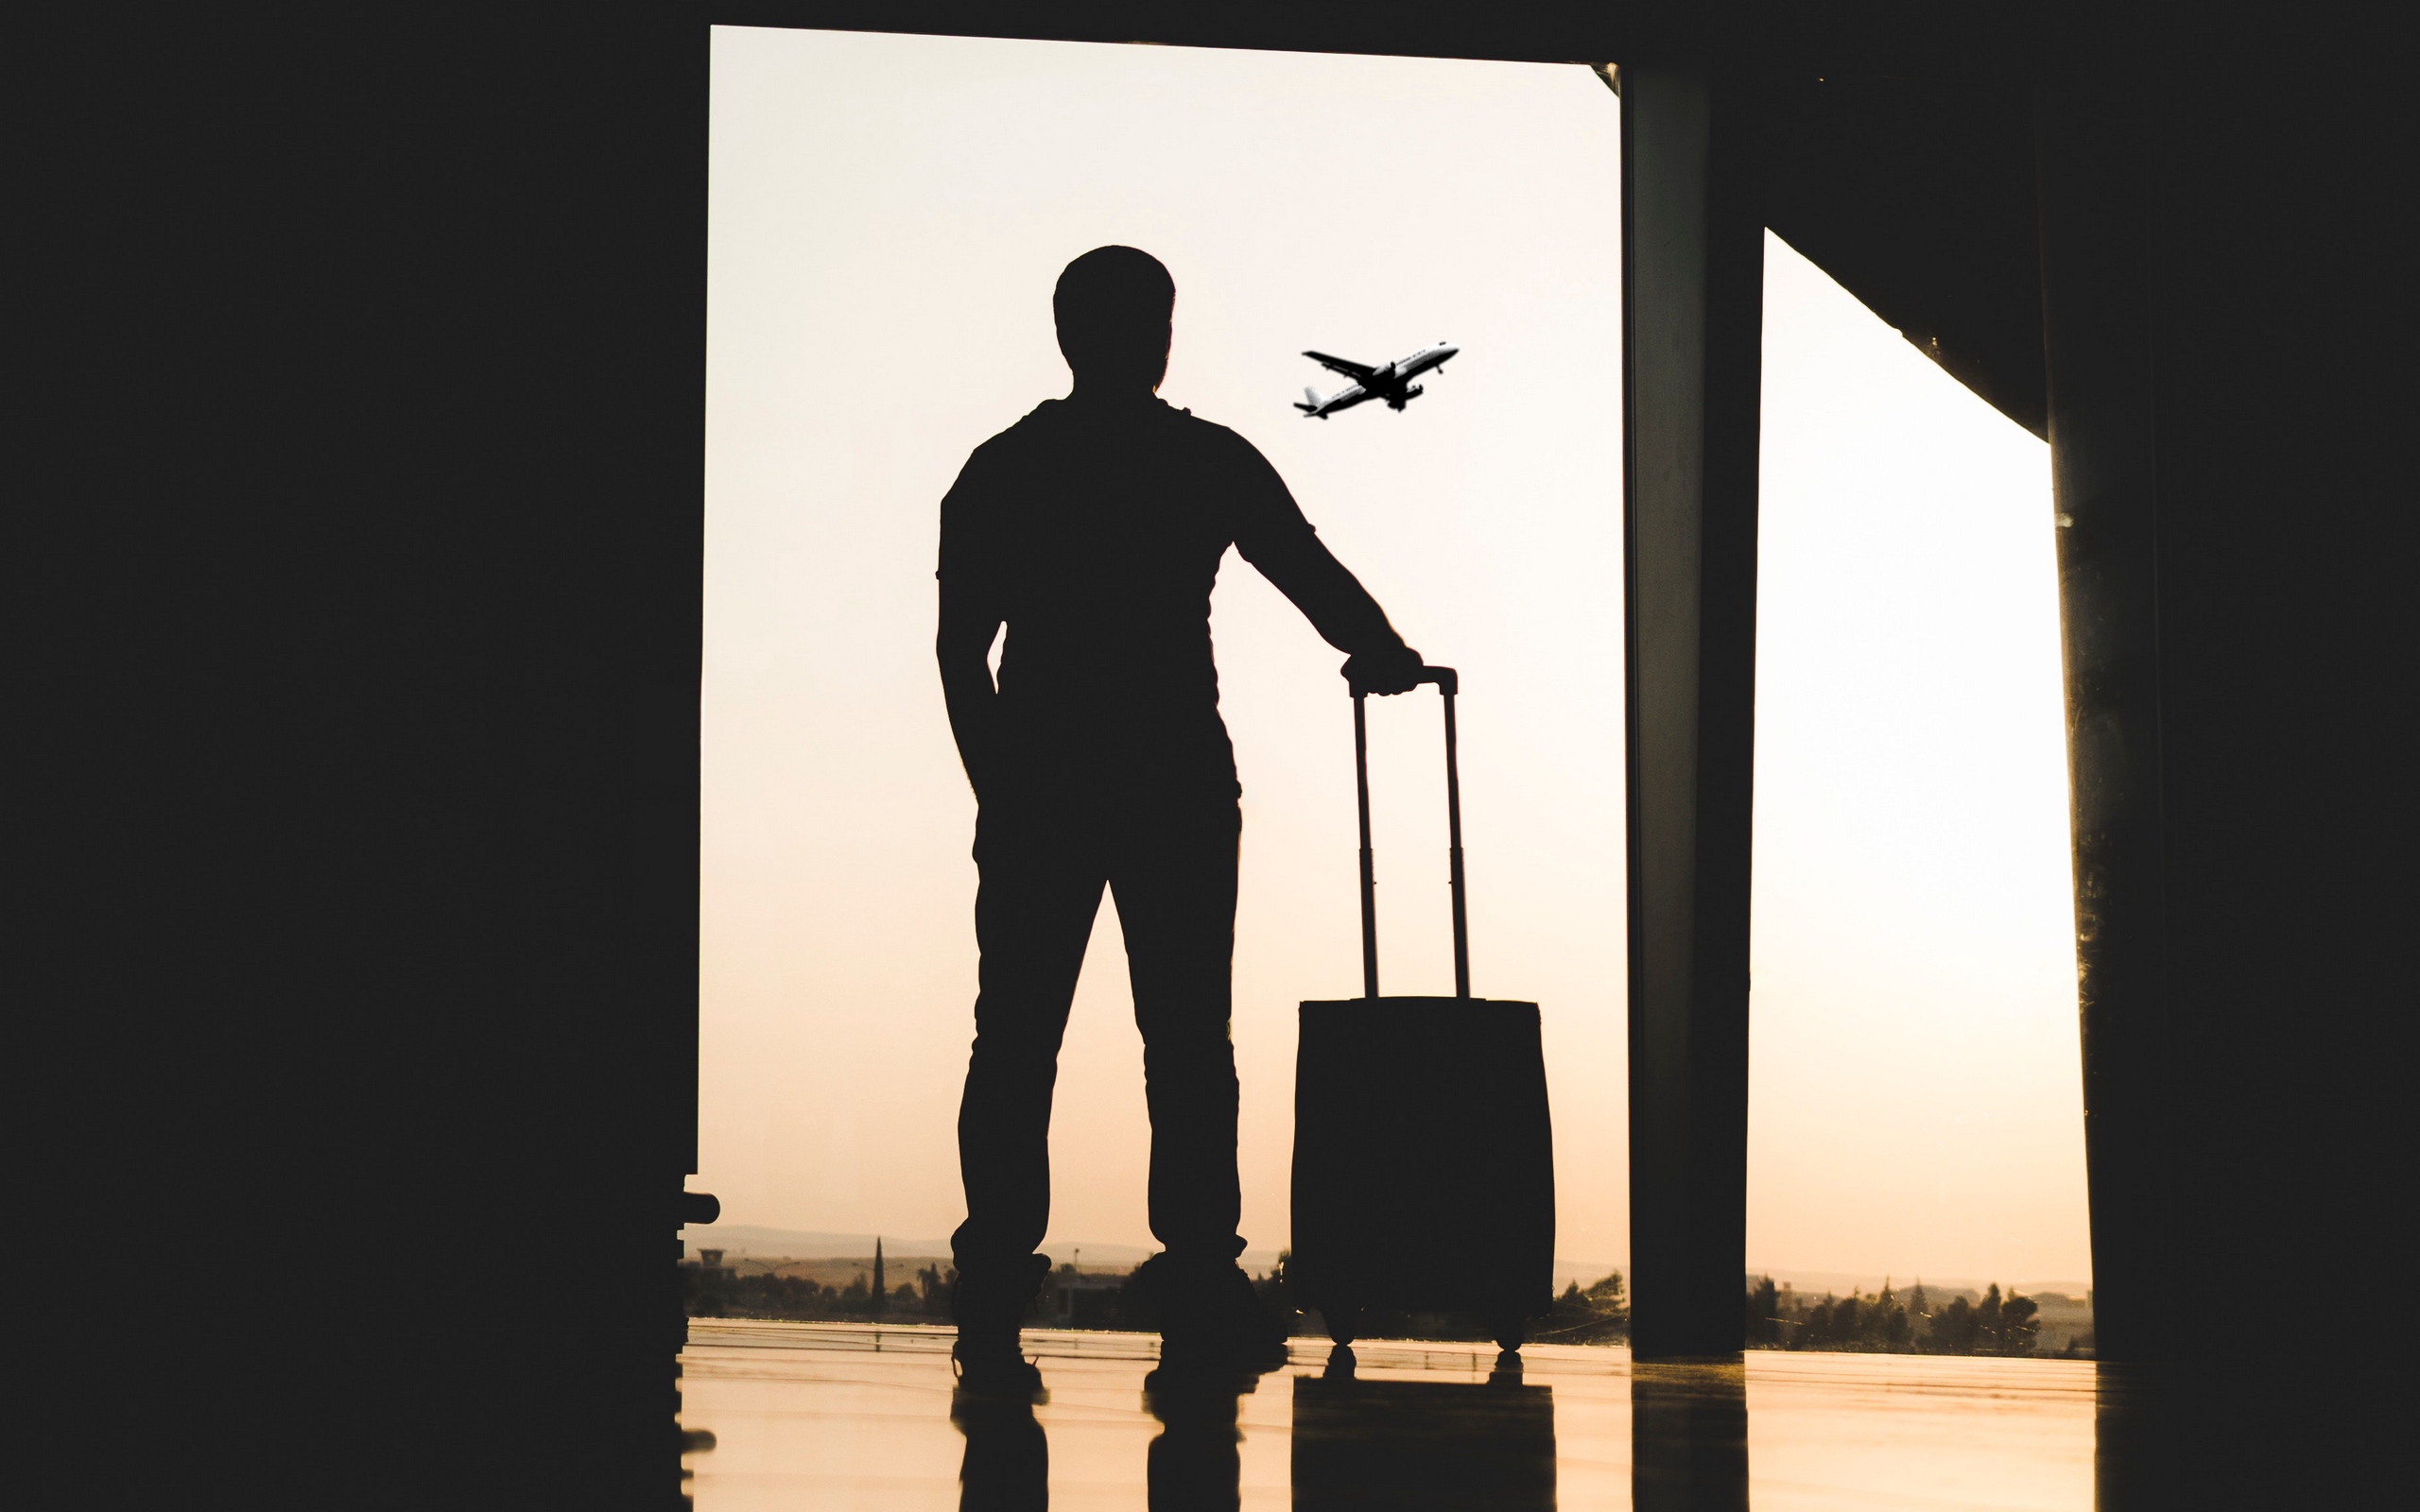 Wallpaper Man Silhouette Airport Travel Suitcase Background